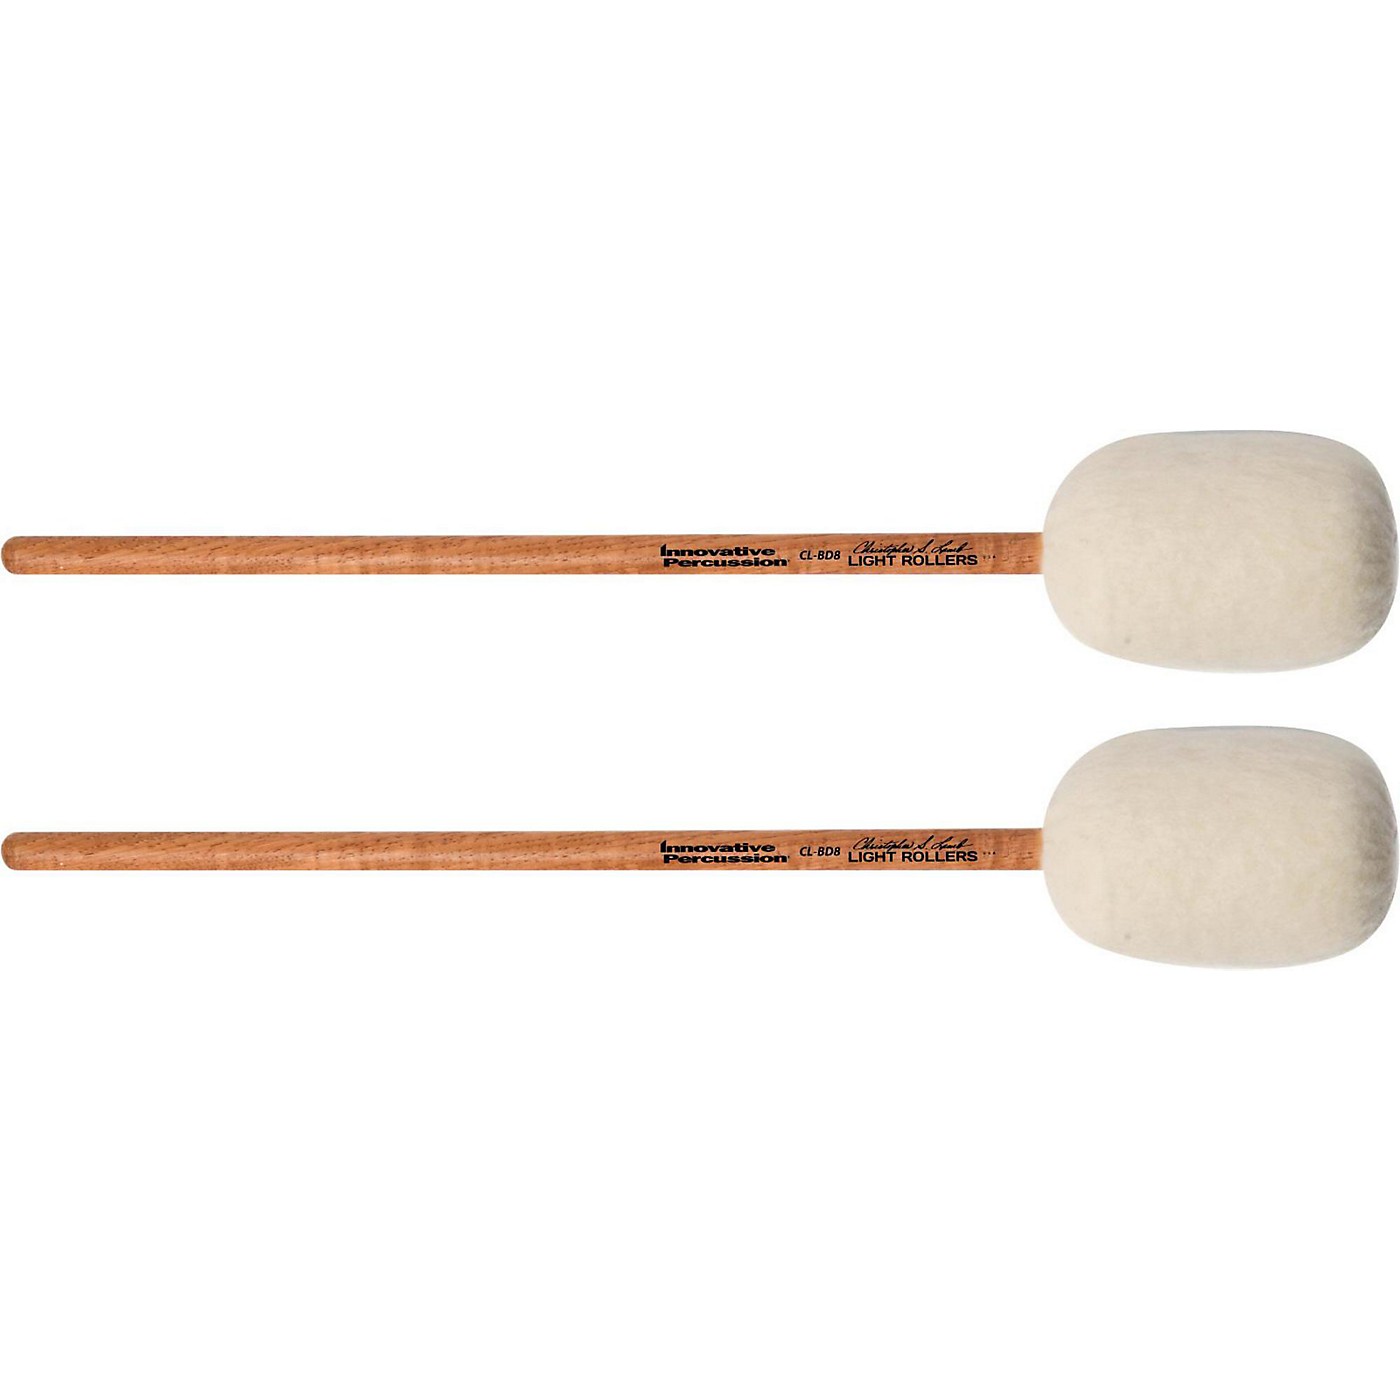 Innovative Percussion Concert Bass Drum Mallet - LIGHT ROLLERS (pair) thumbnail